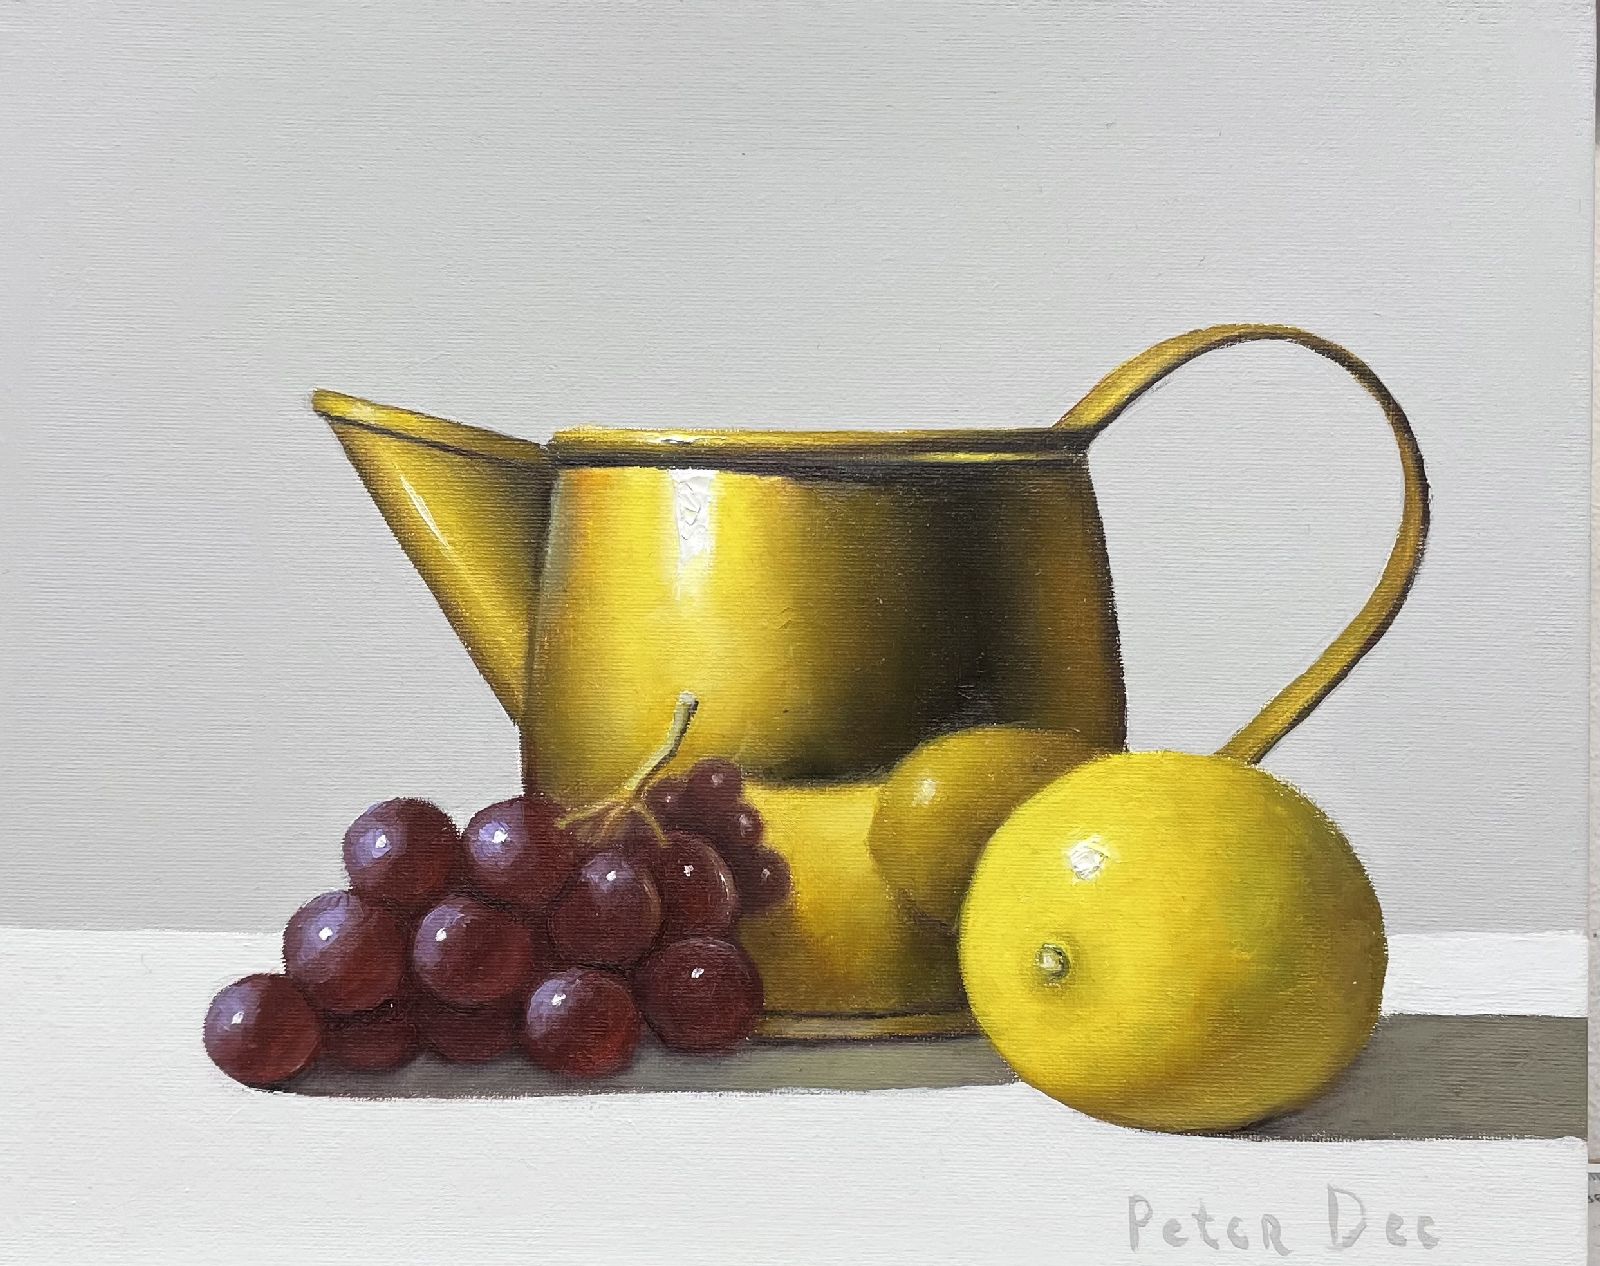 Brass Jug with Lemon and Grapes by Peter Dee